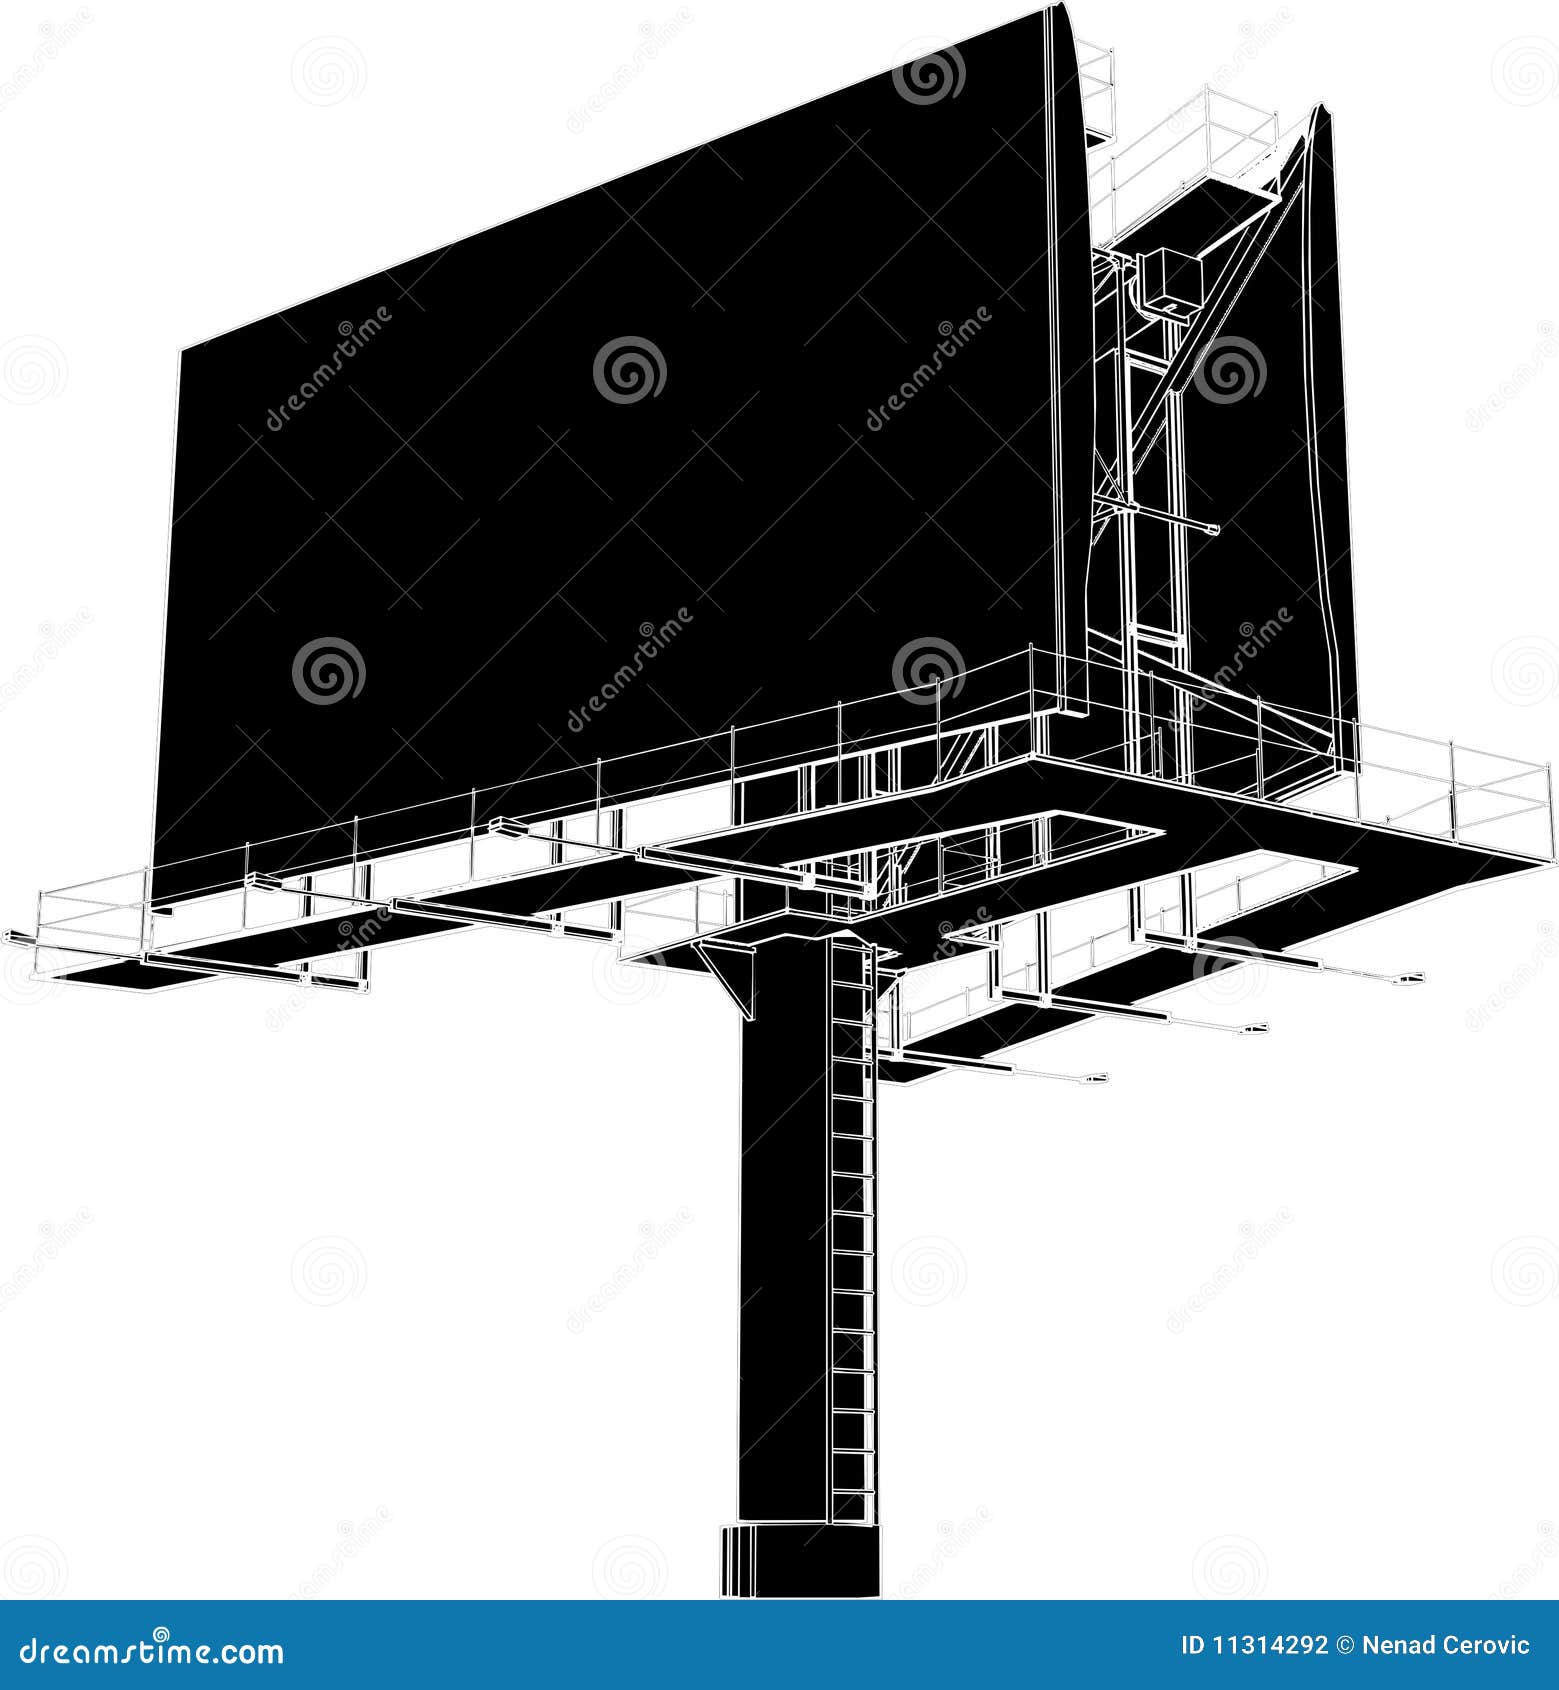 How to Start a Billboard Advertising Company